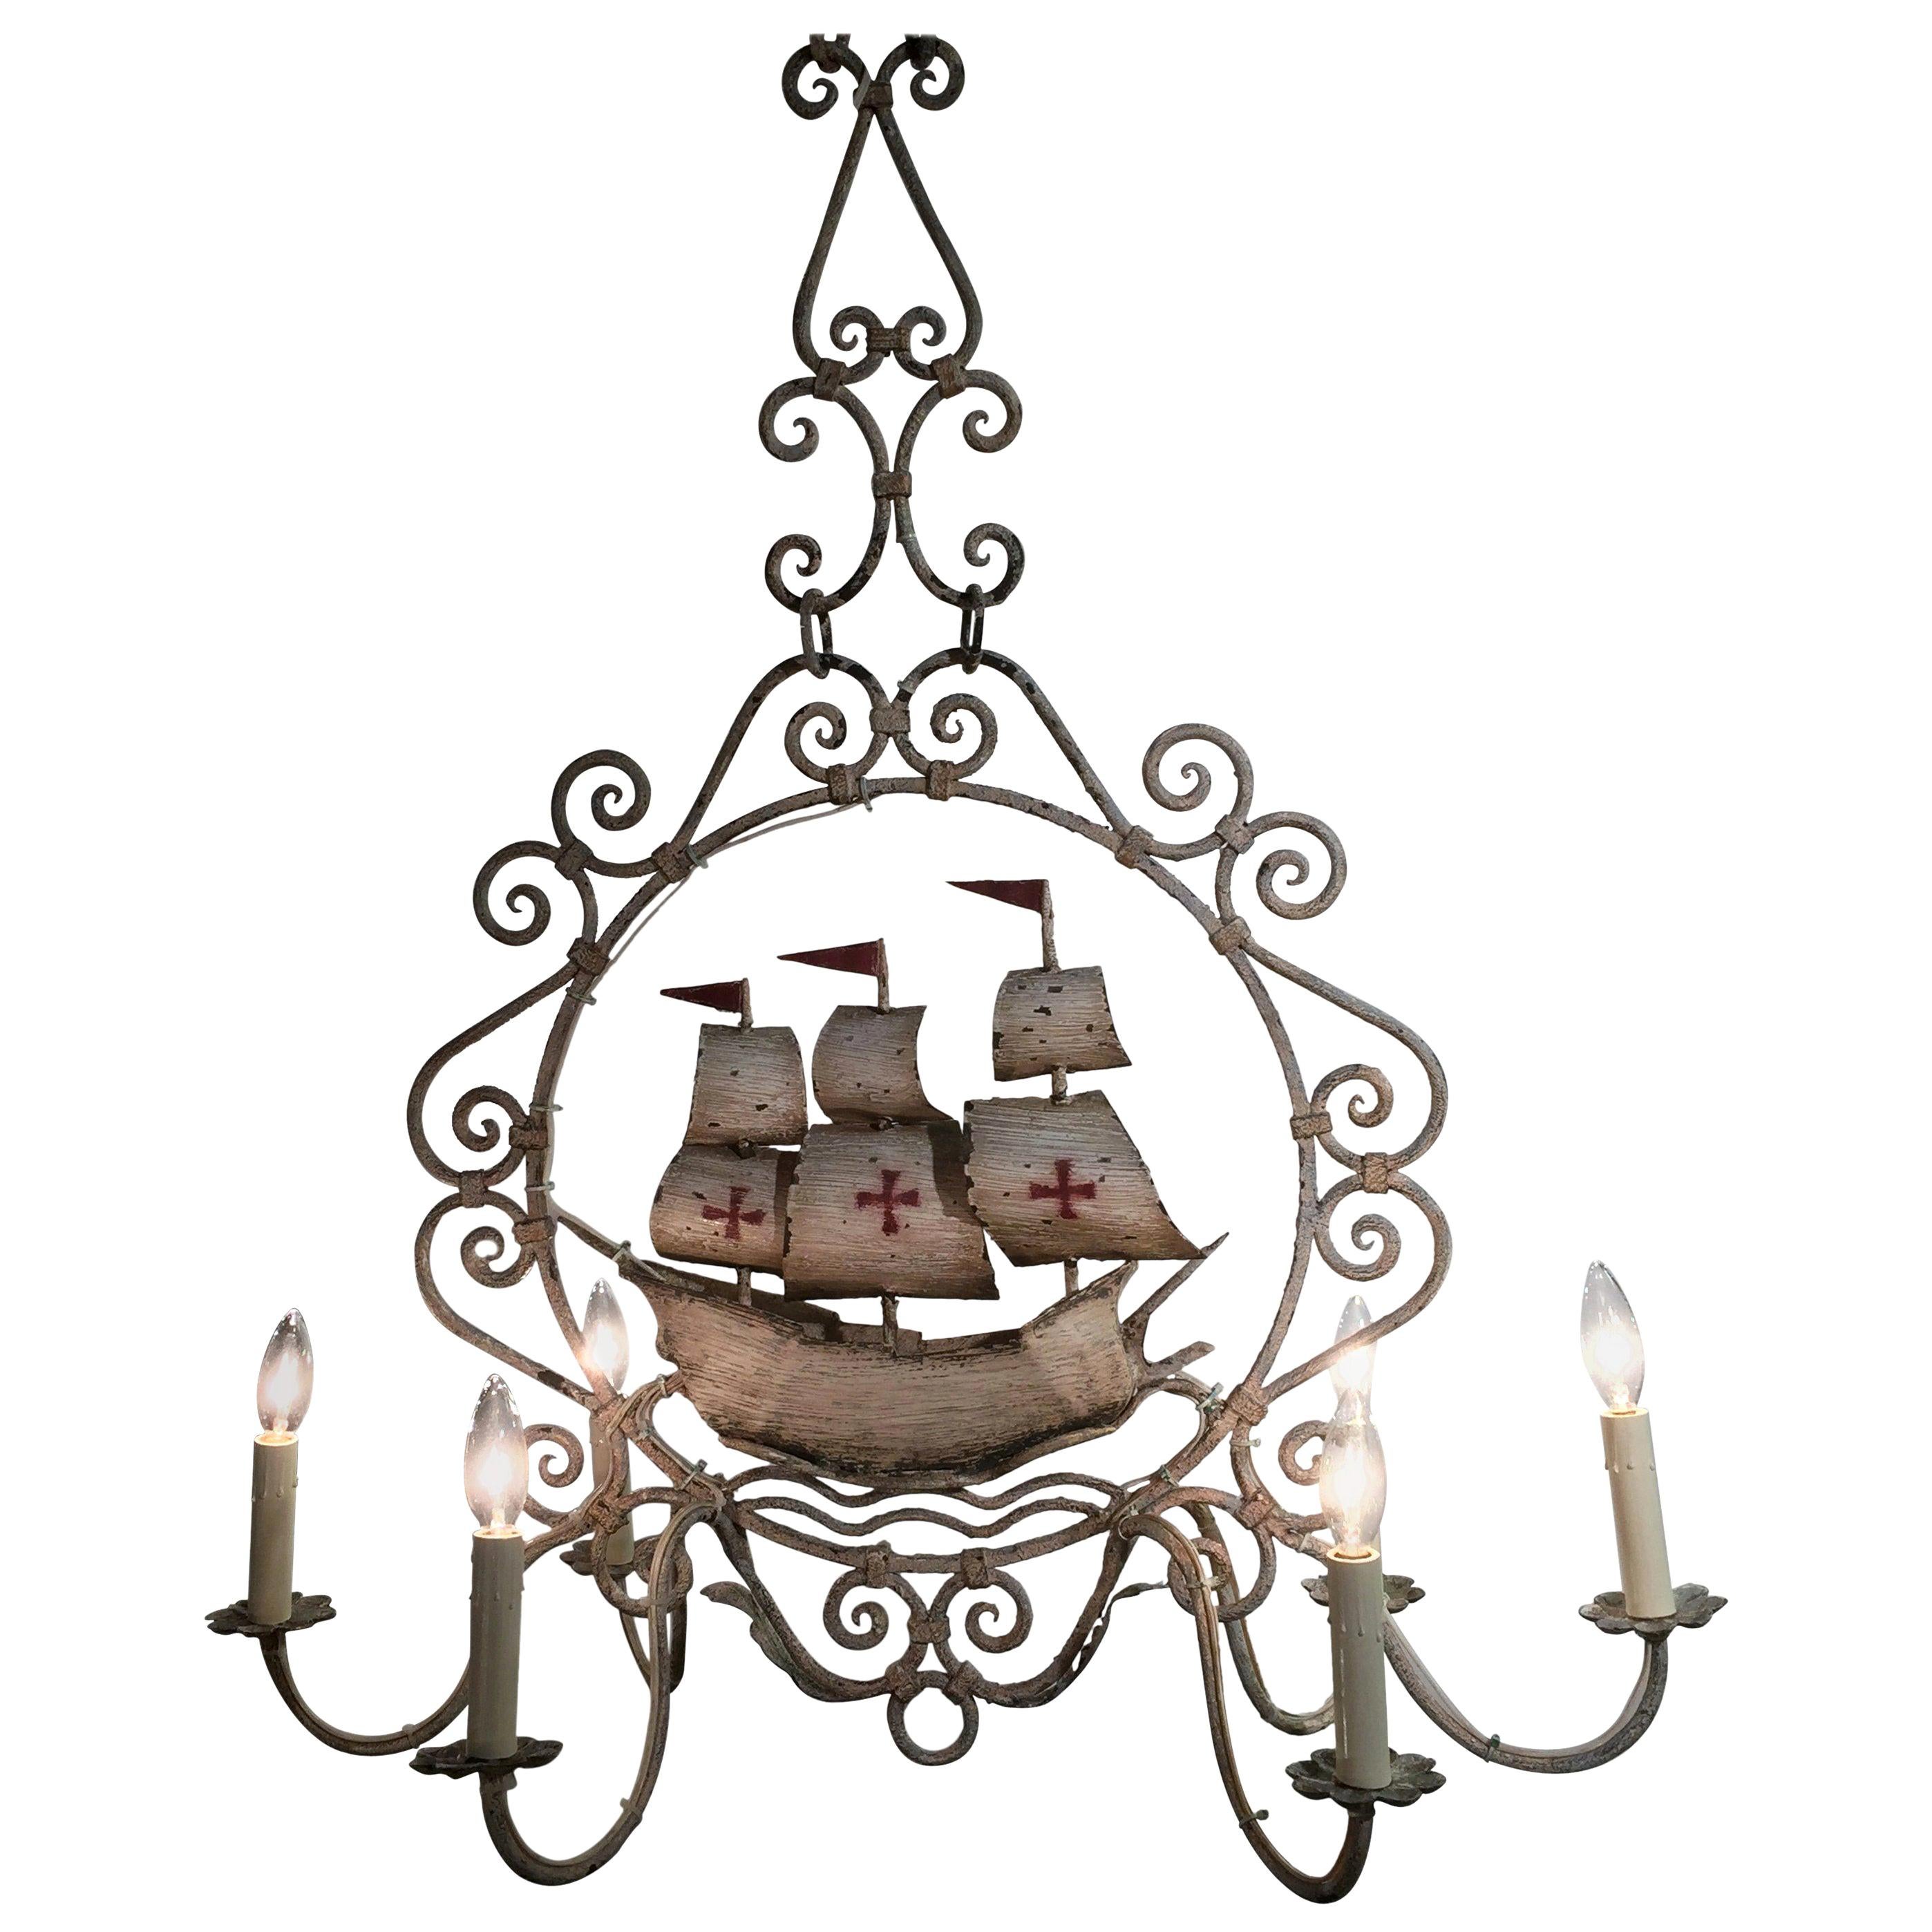 Midcentury, French Painted Iron Six-Light Sailboat Chandelier